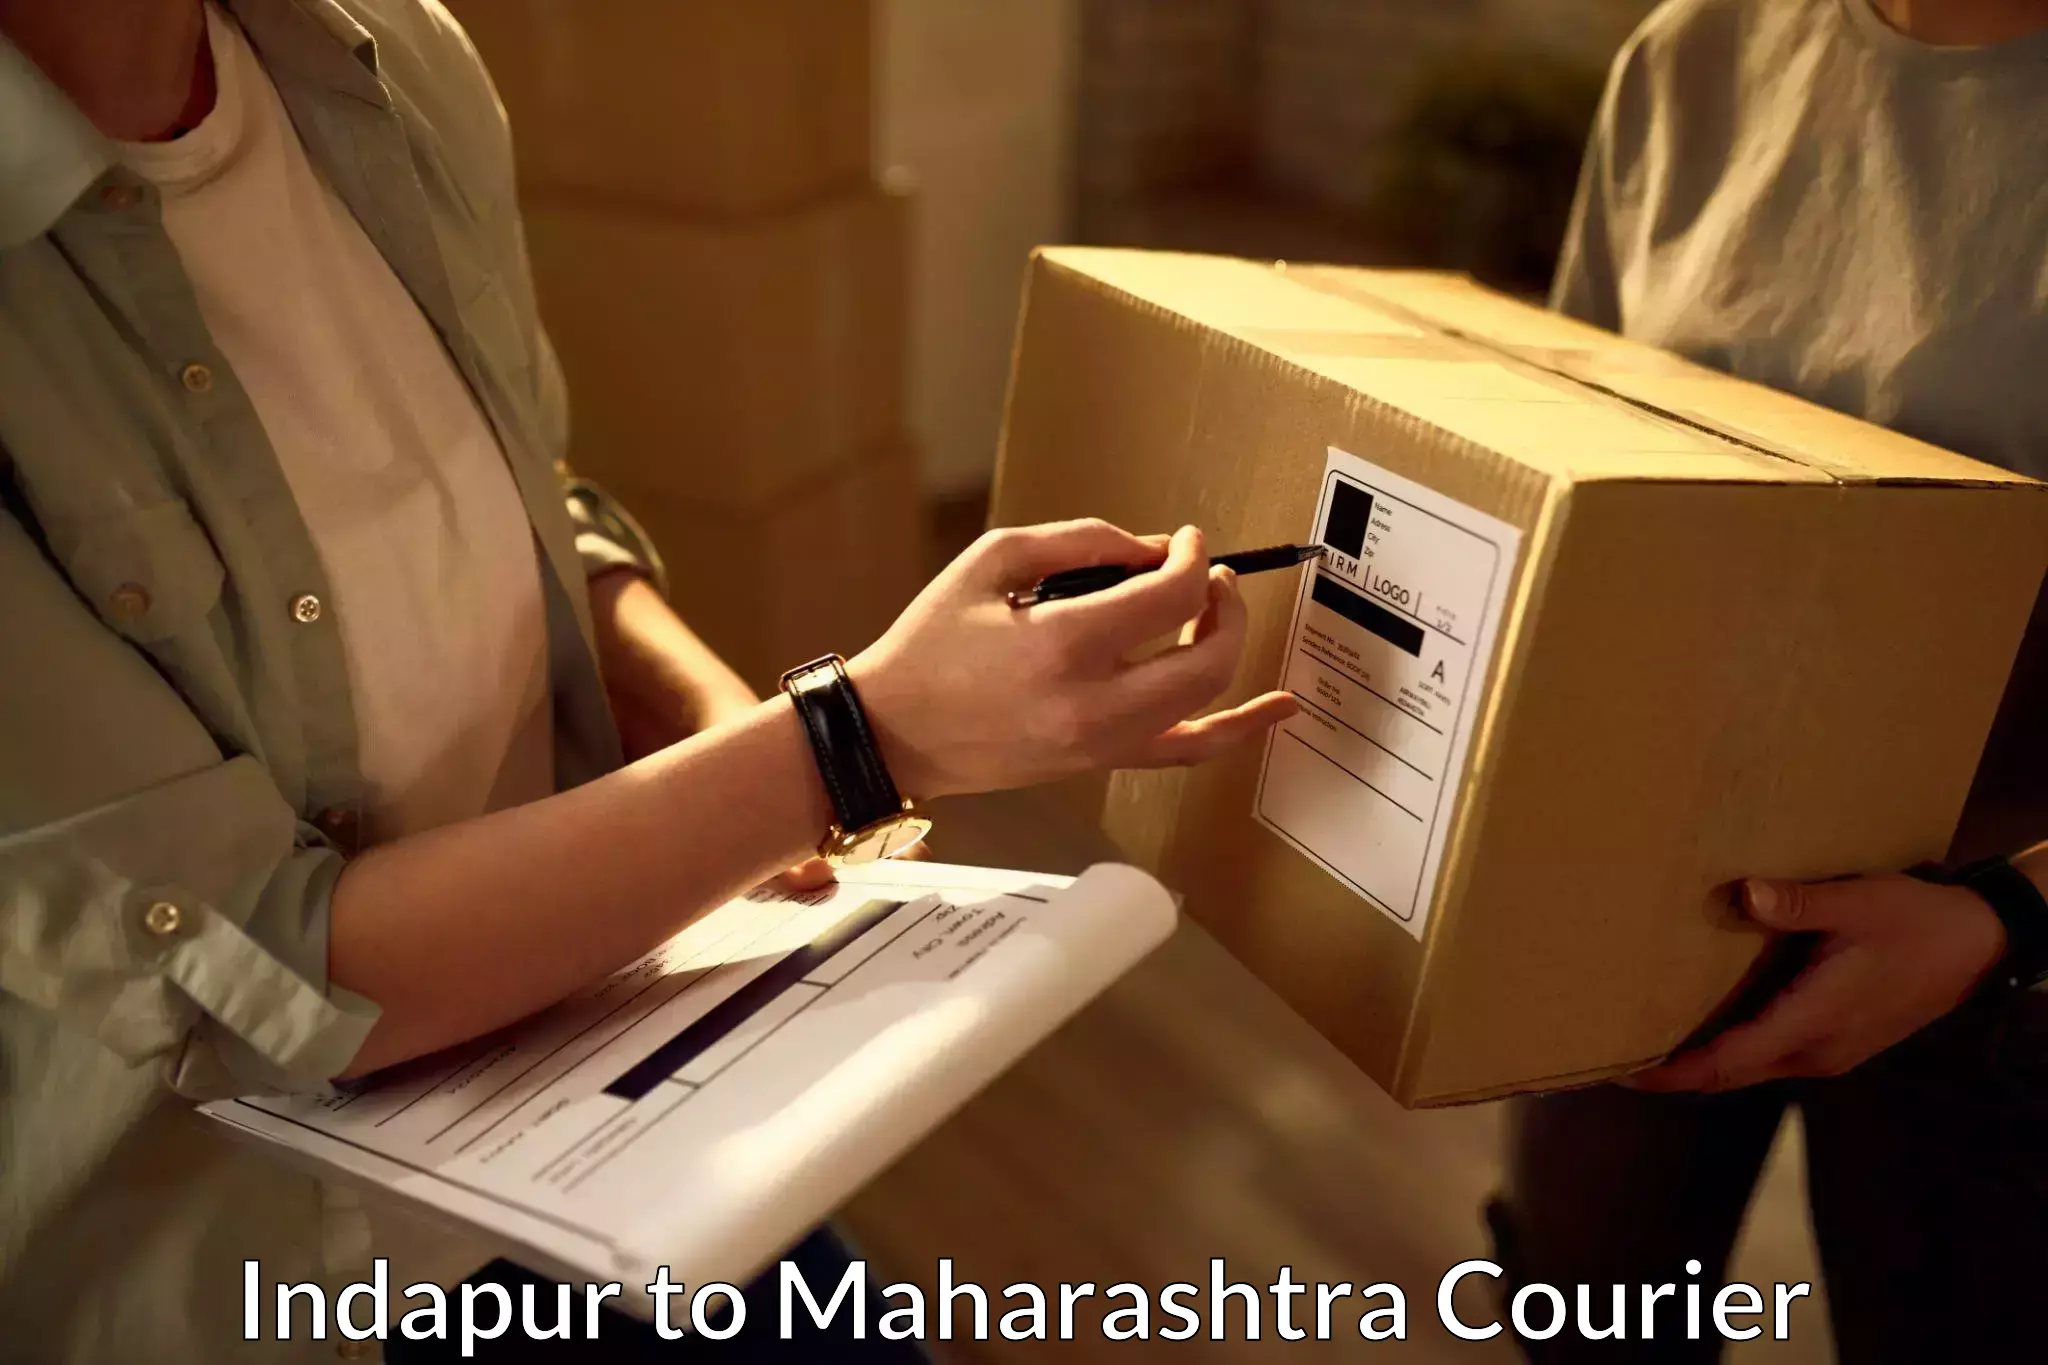 Air courier services in Indapur to Mumbai University